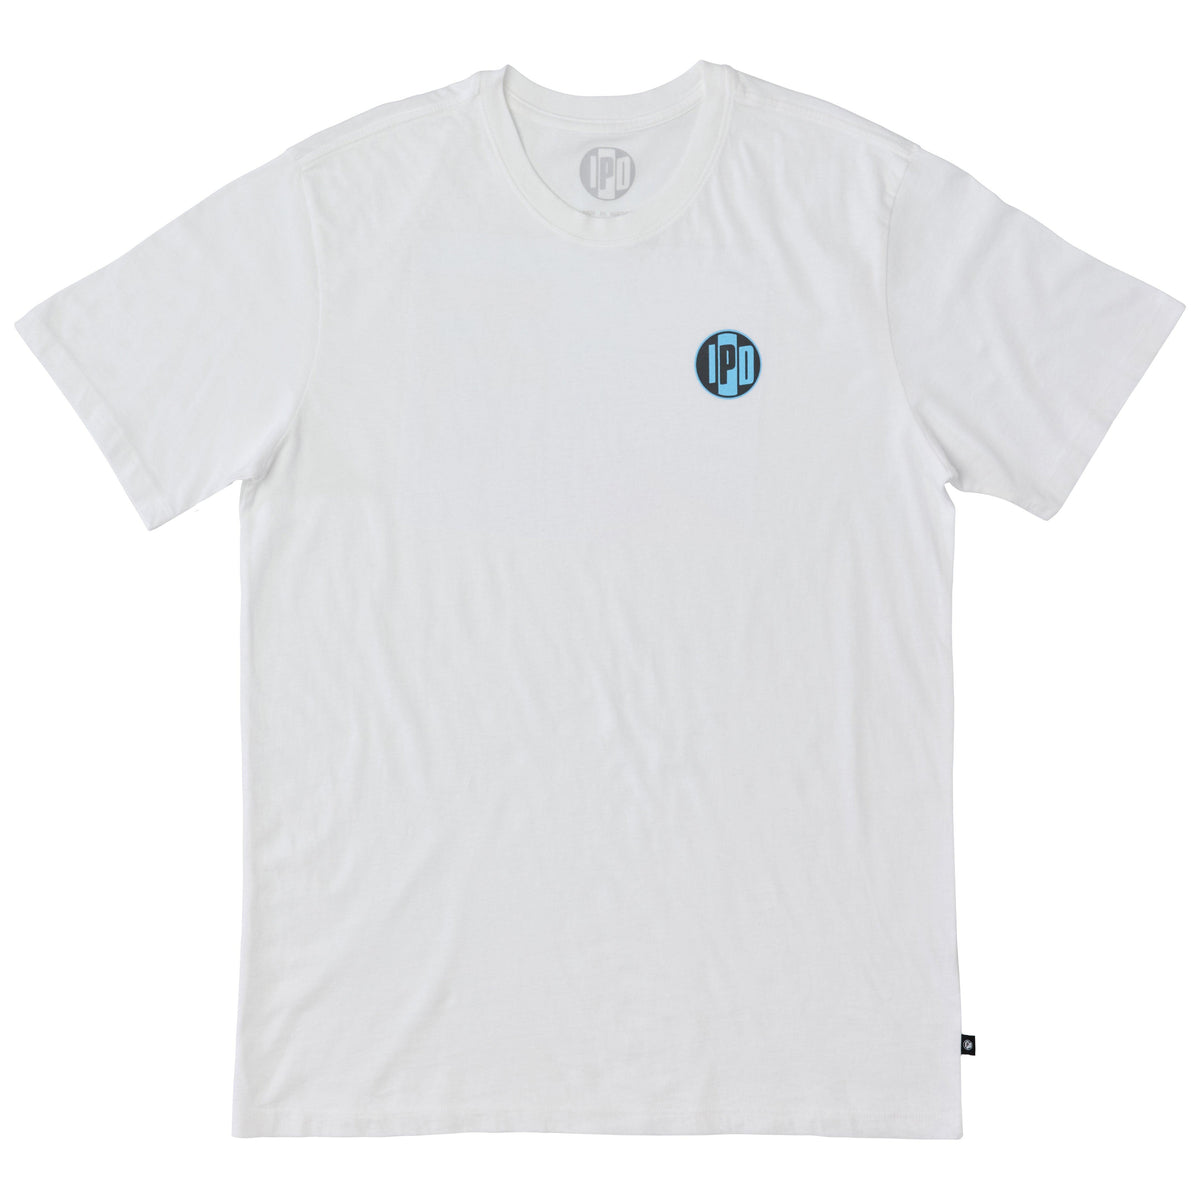 The Surf Shop Super Soft Tee has a left chest front graphic of the IPD logo in black and light blue. The back pictures a hand-drawn depiction of a surf shop across the upper middle back of the shirt. The body color of the shirt is white and the graphic color is multicolored and has a small black side seam label with the IPD logo.